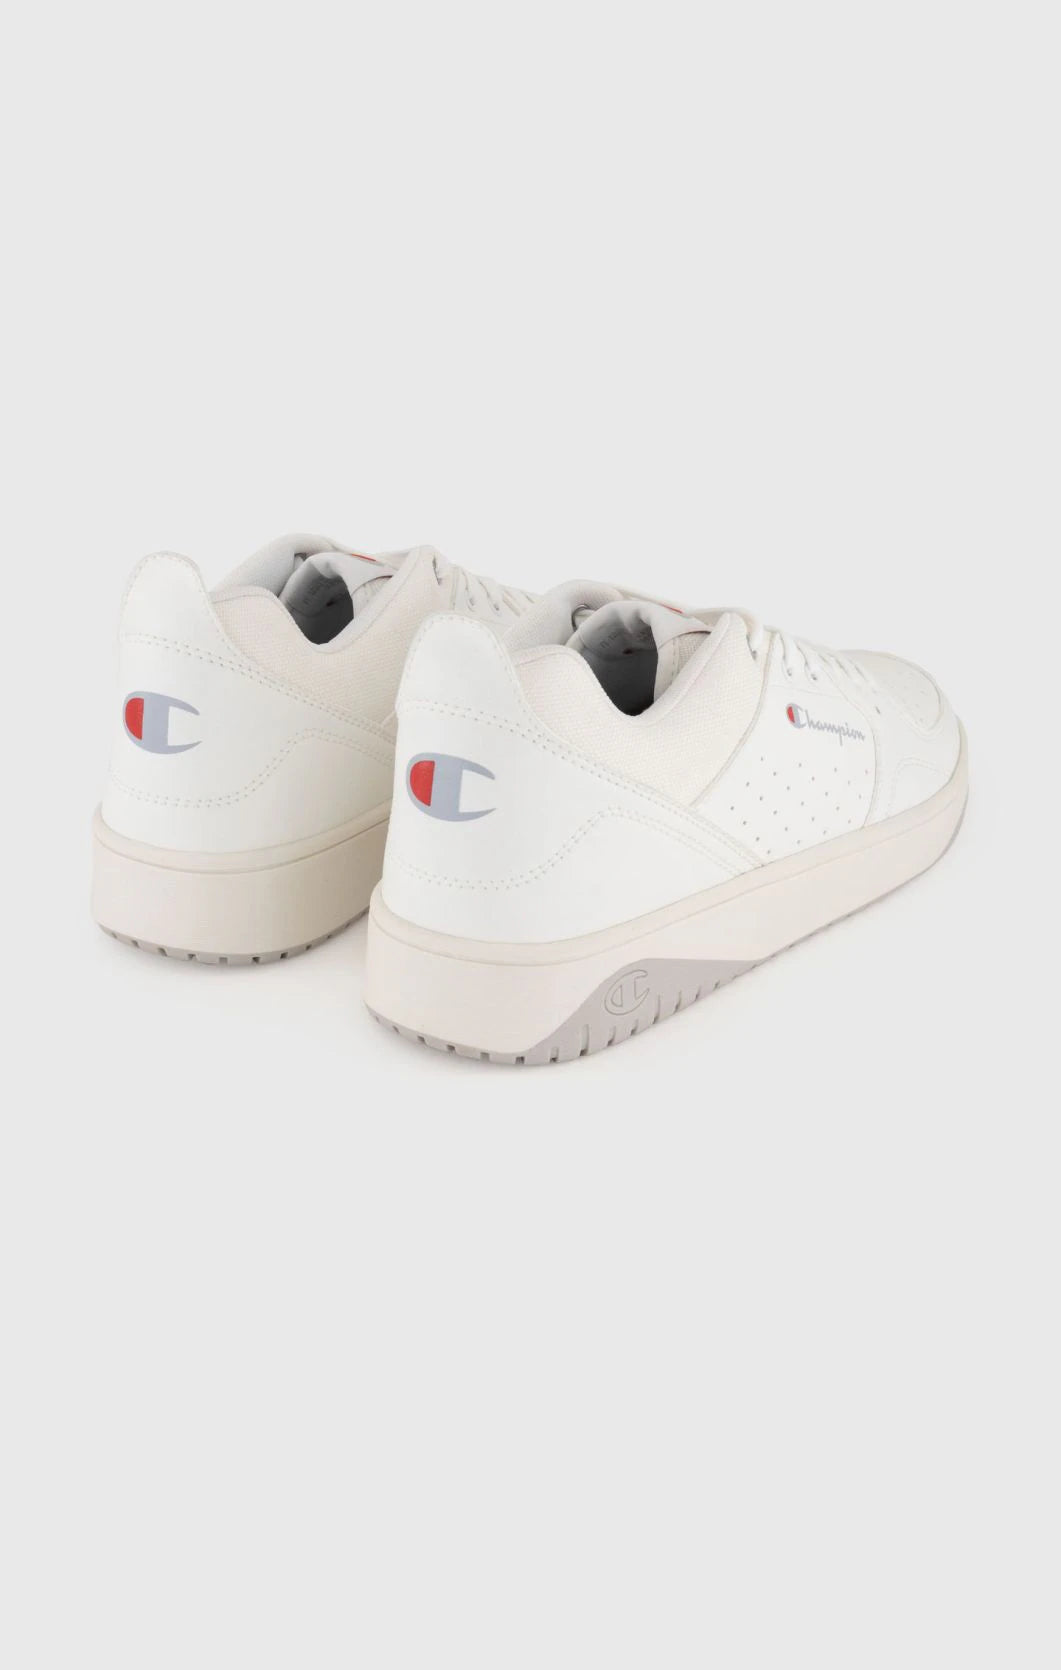 Champion ROYAL LOW-TOP Sneaker Turnschuh Weiß